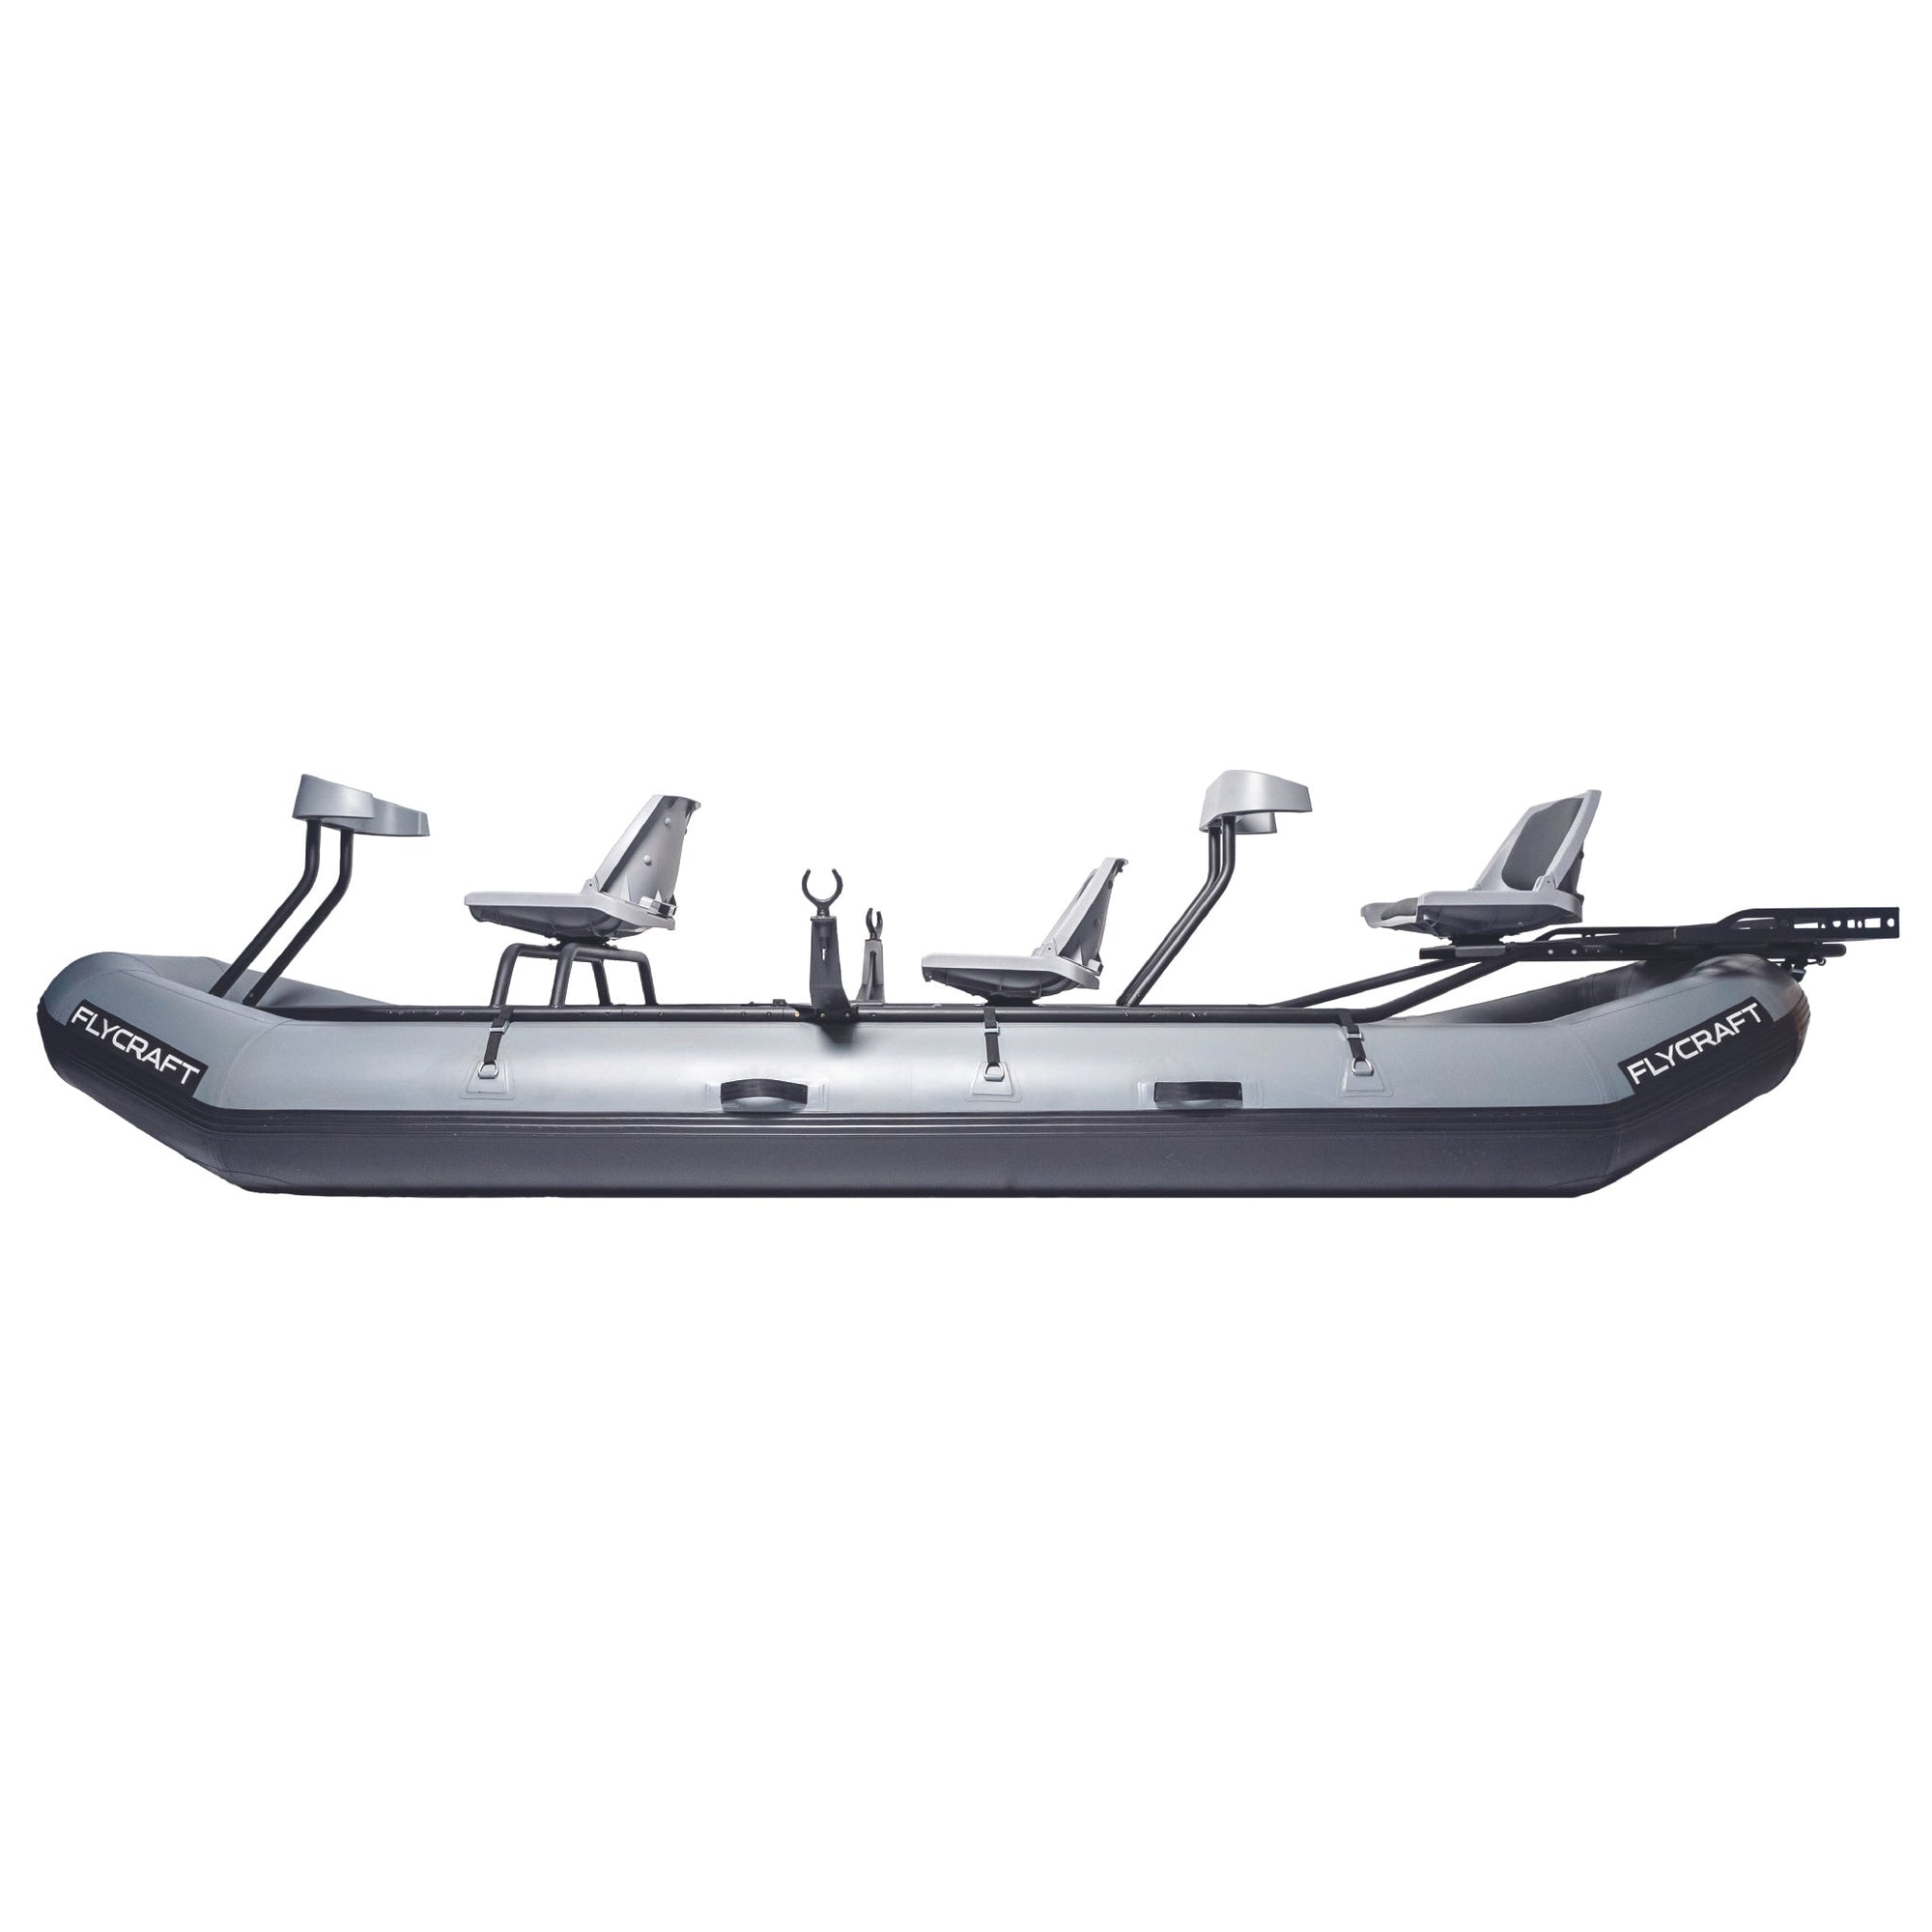 Flycraft's Inflatable Fishing Boat: Guide Fish Package (3-Man) - FLYCRAFT  USA